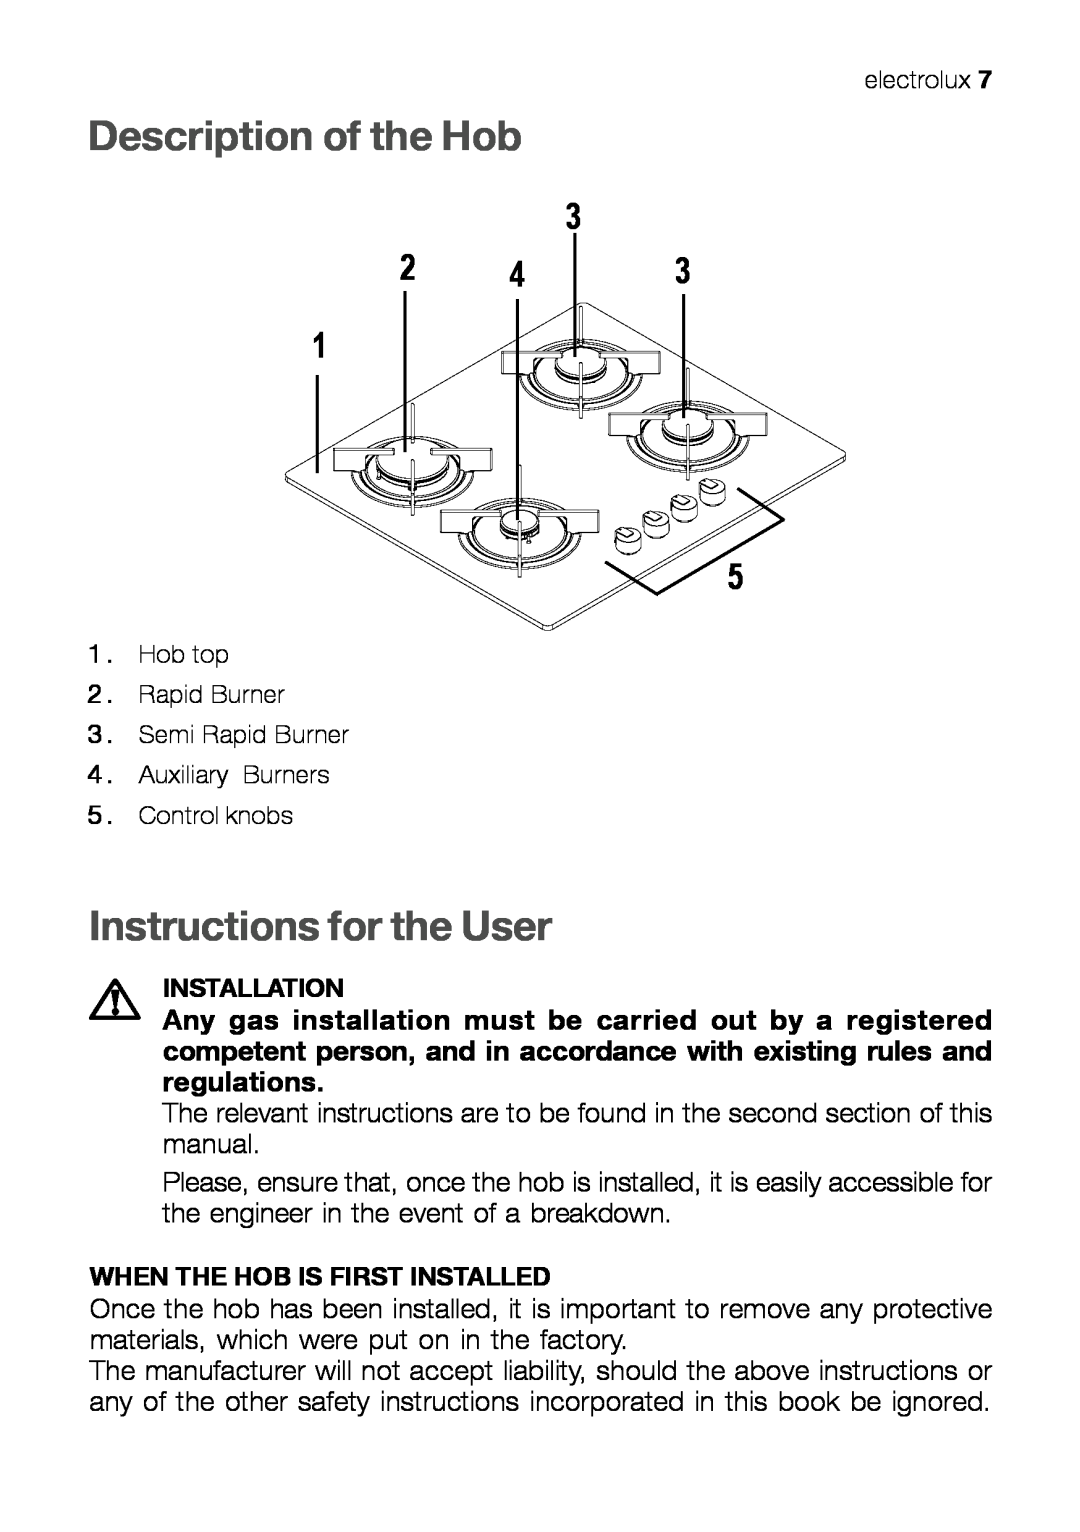 Electrolux EHT 60410 Description of the Hob, Instructions for the User, Installation, When The Hob Is First Installed 